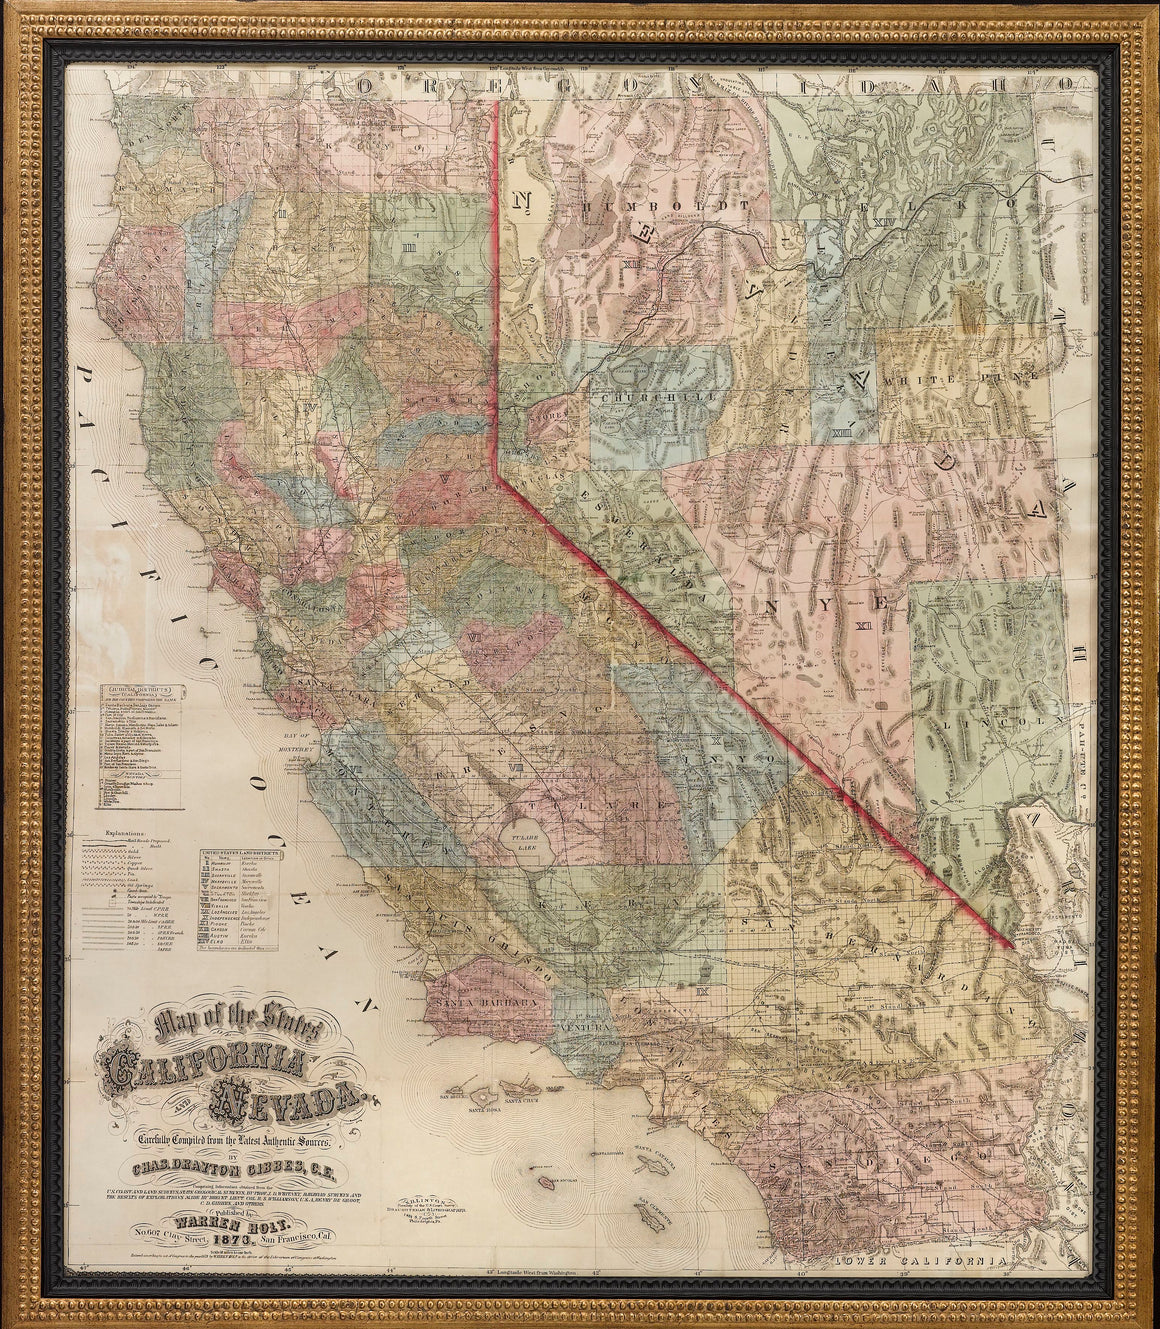 1873 "Map of the States of California and Nevada. Carefully Compiled from the Latest Authentic Sources" by Chas. Drayton Gibbes